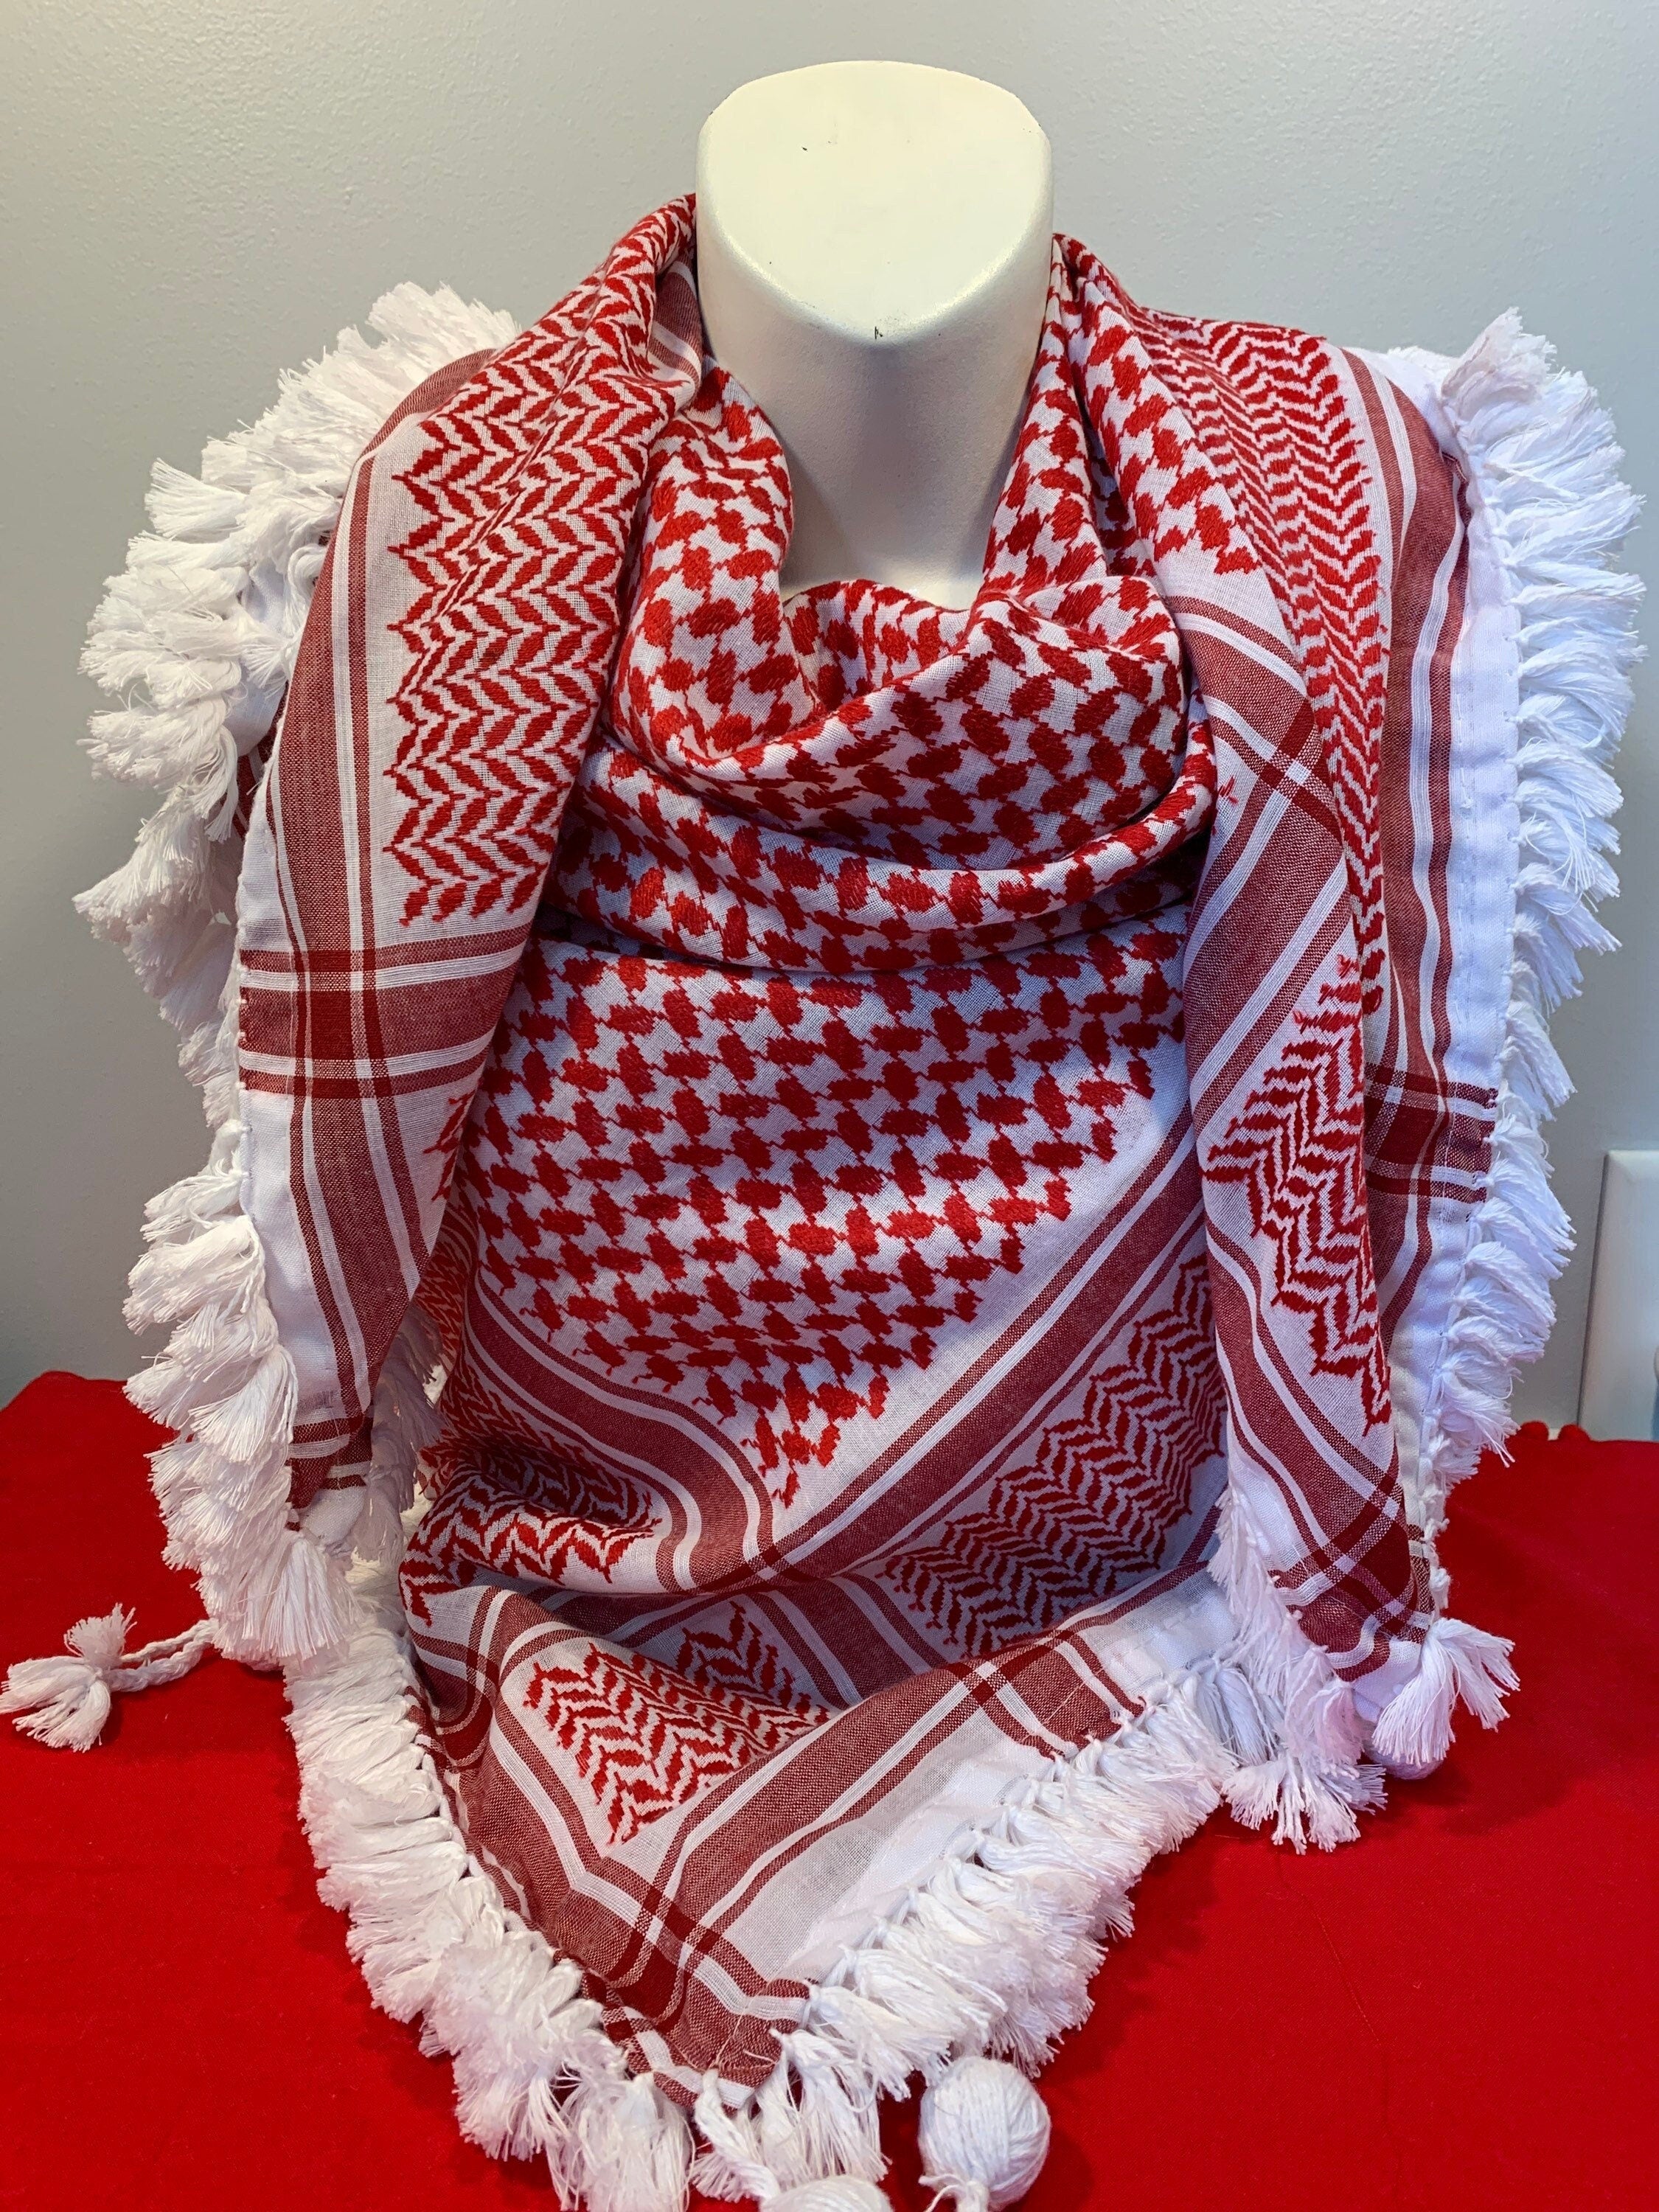 Shemagh Hand-Tied in Jordan Tactical Scarf 50